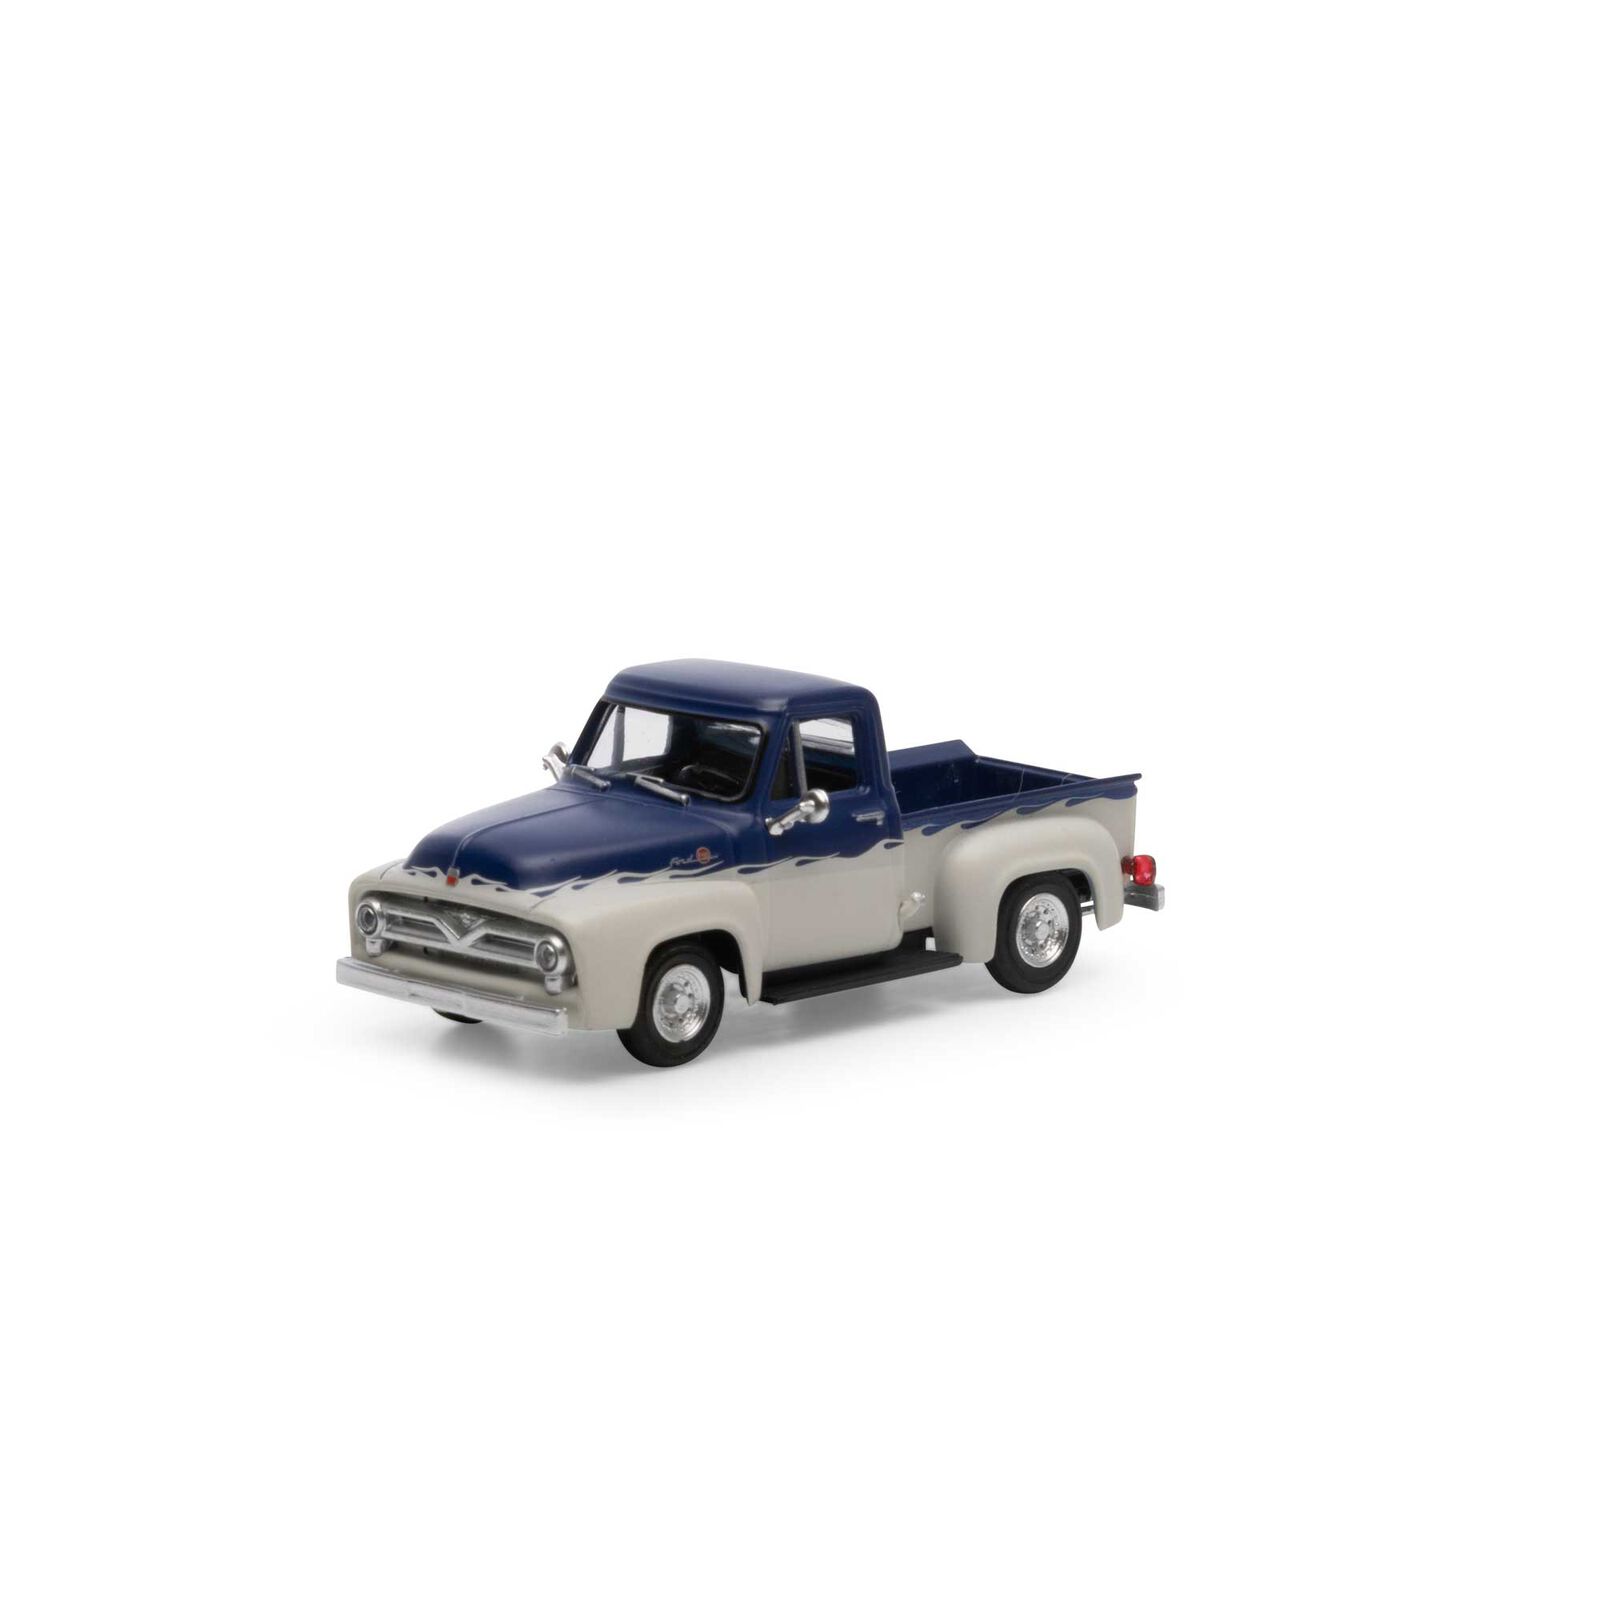 Athearn RTR 26466 - HO 1955 Ford F-100 Pickup - Blue/White